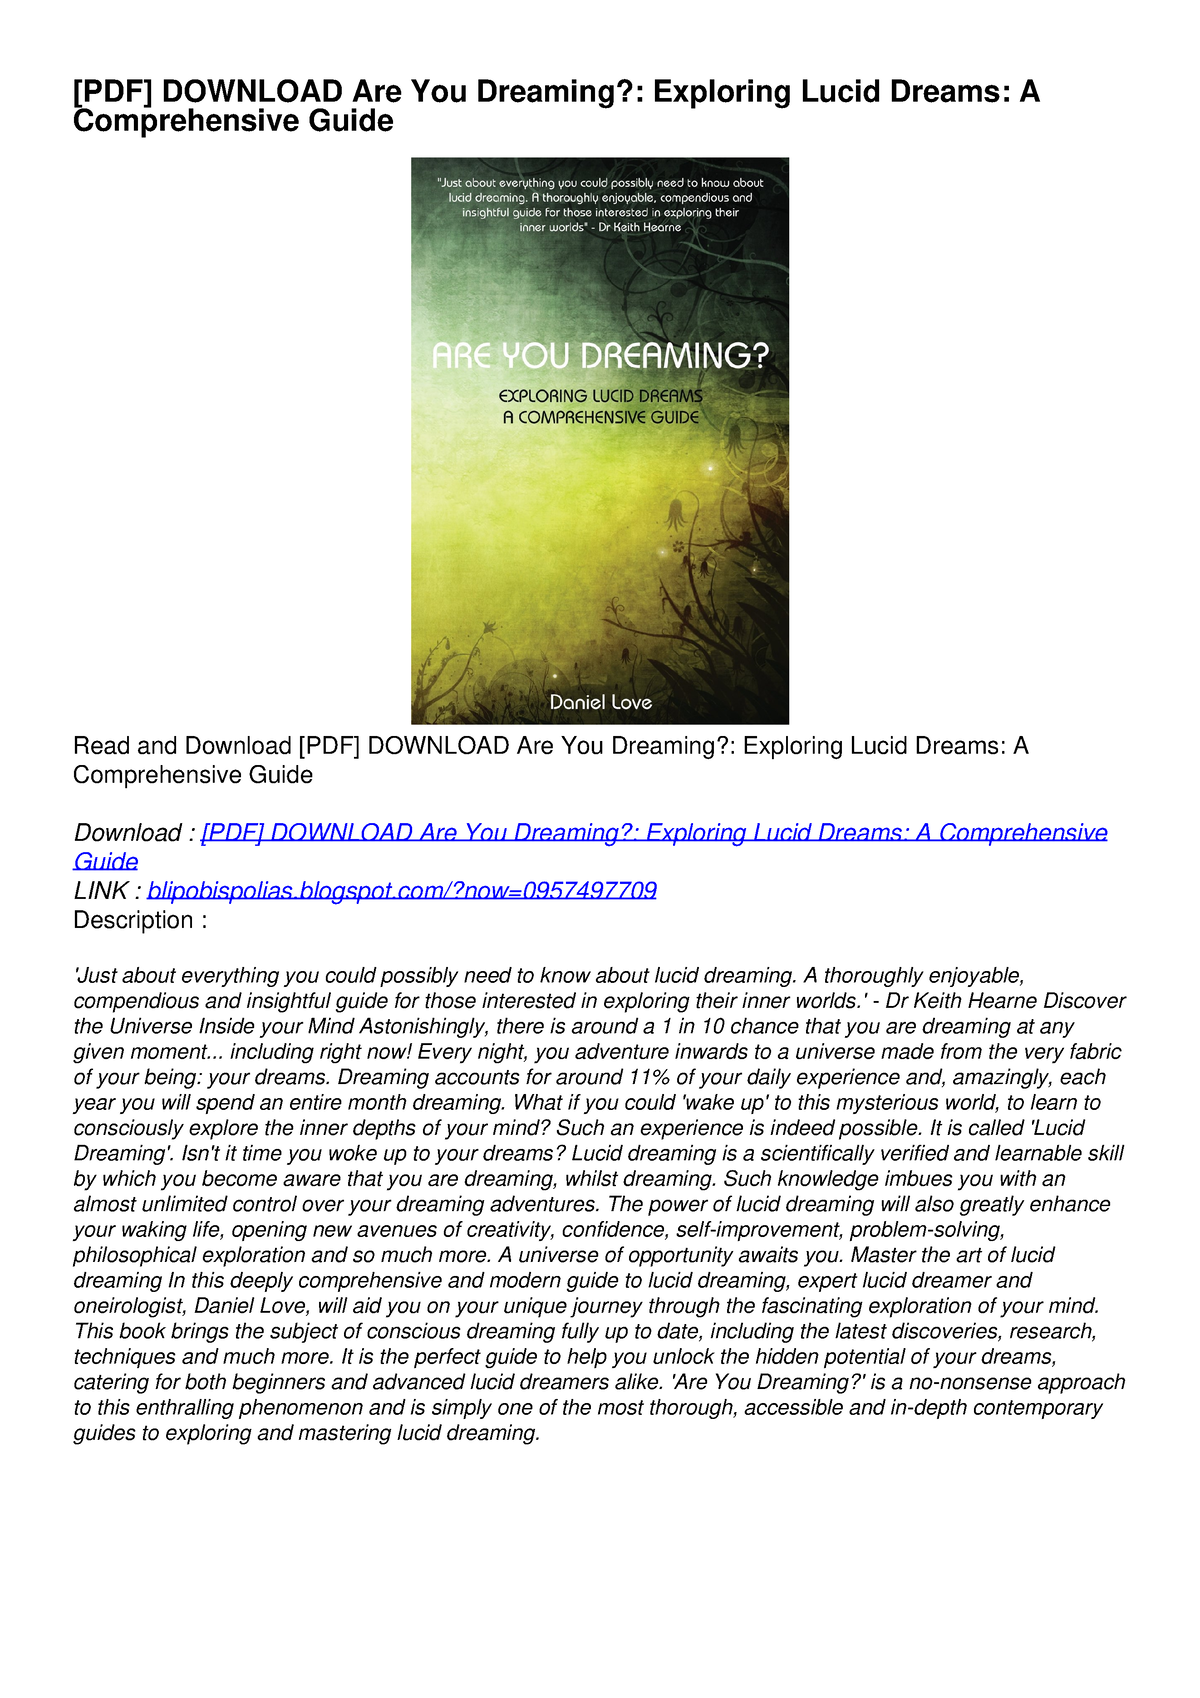 PDF DOWNLOAD Are You Dreaming Exploring Lucid Dreams A Comprehensive Guide Blogspot Now